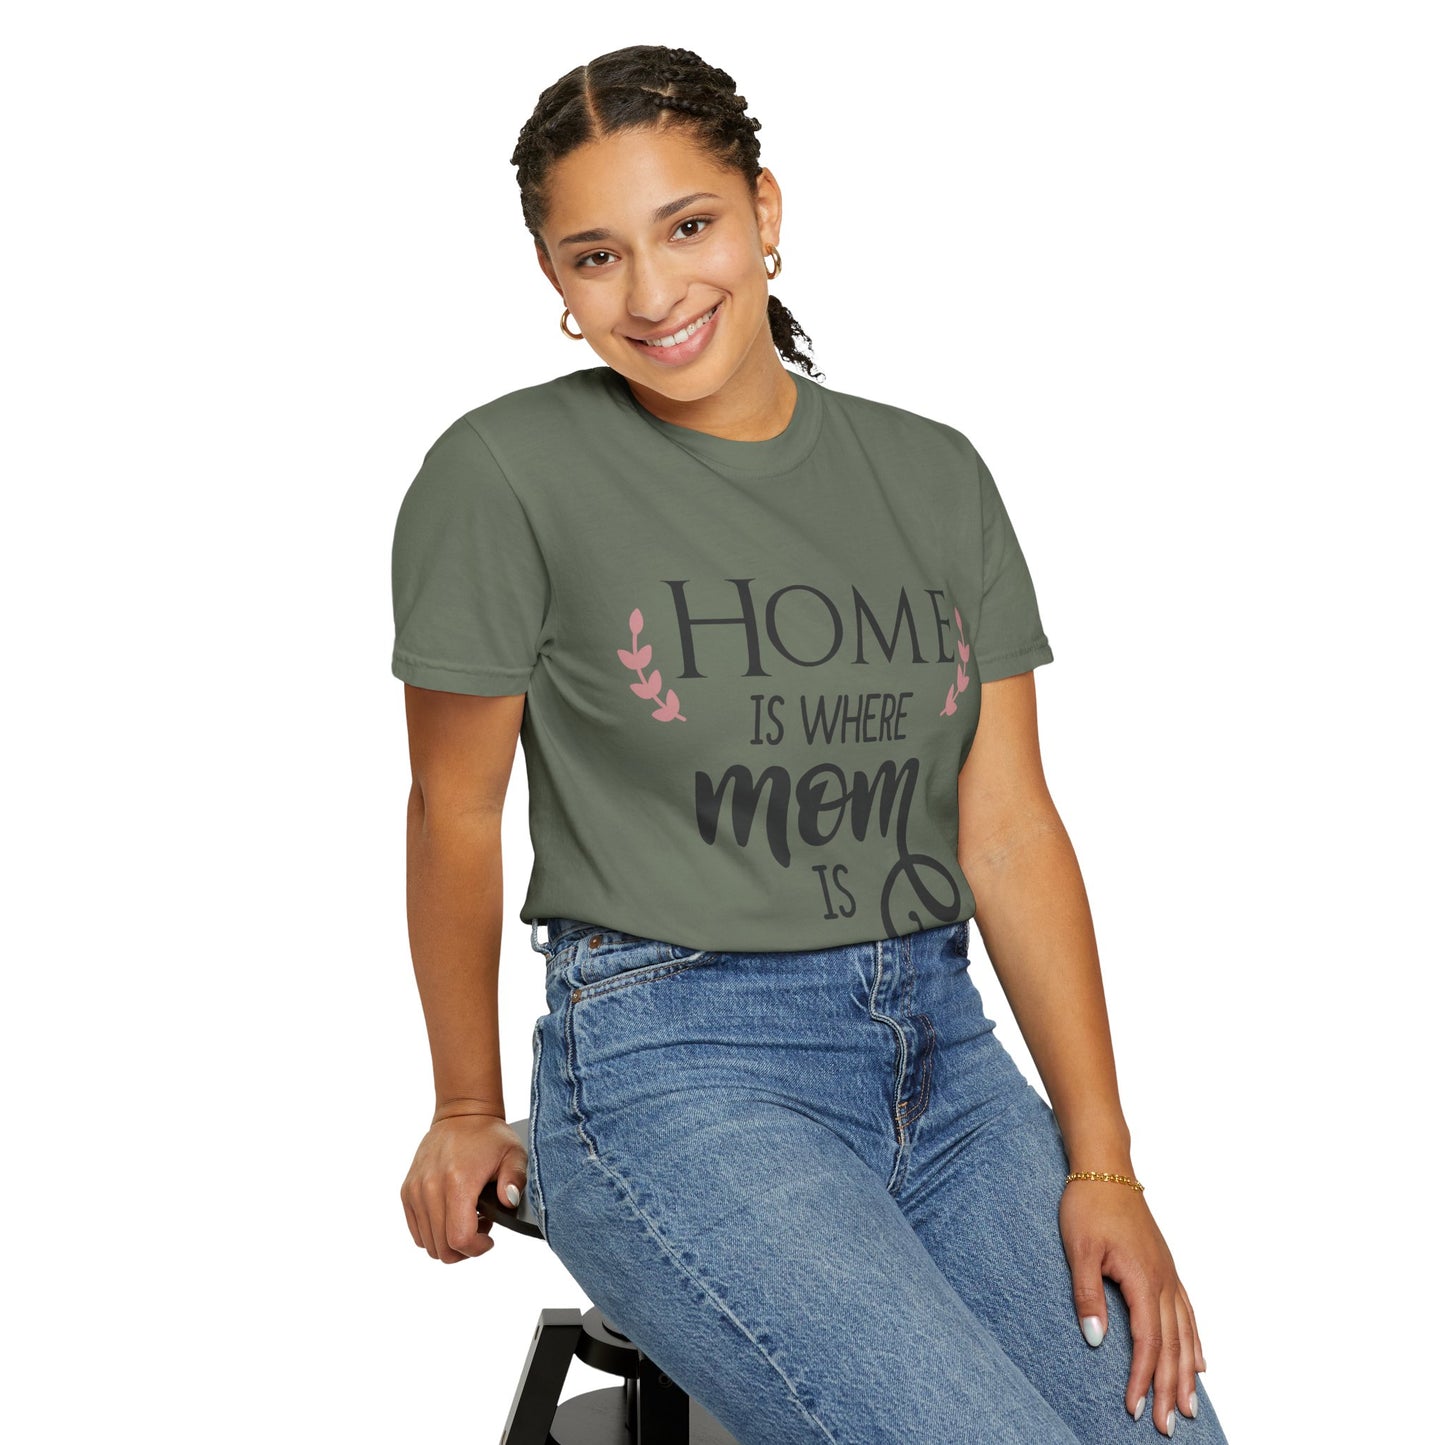 Home is where mom is - Unisex Garment-Dyed T-shirt